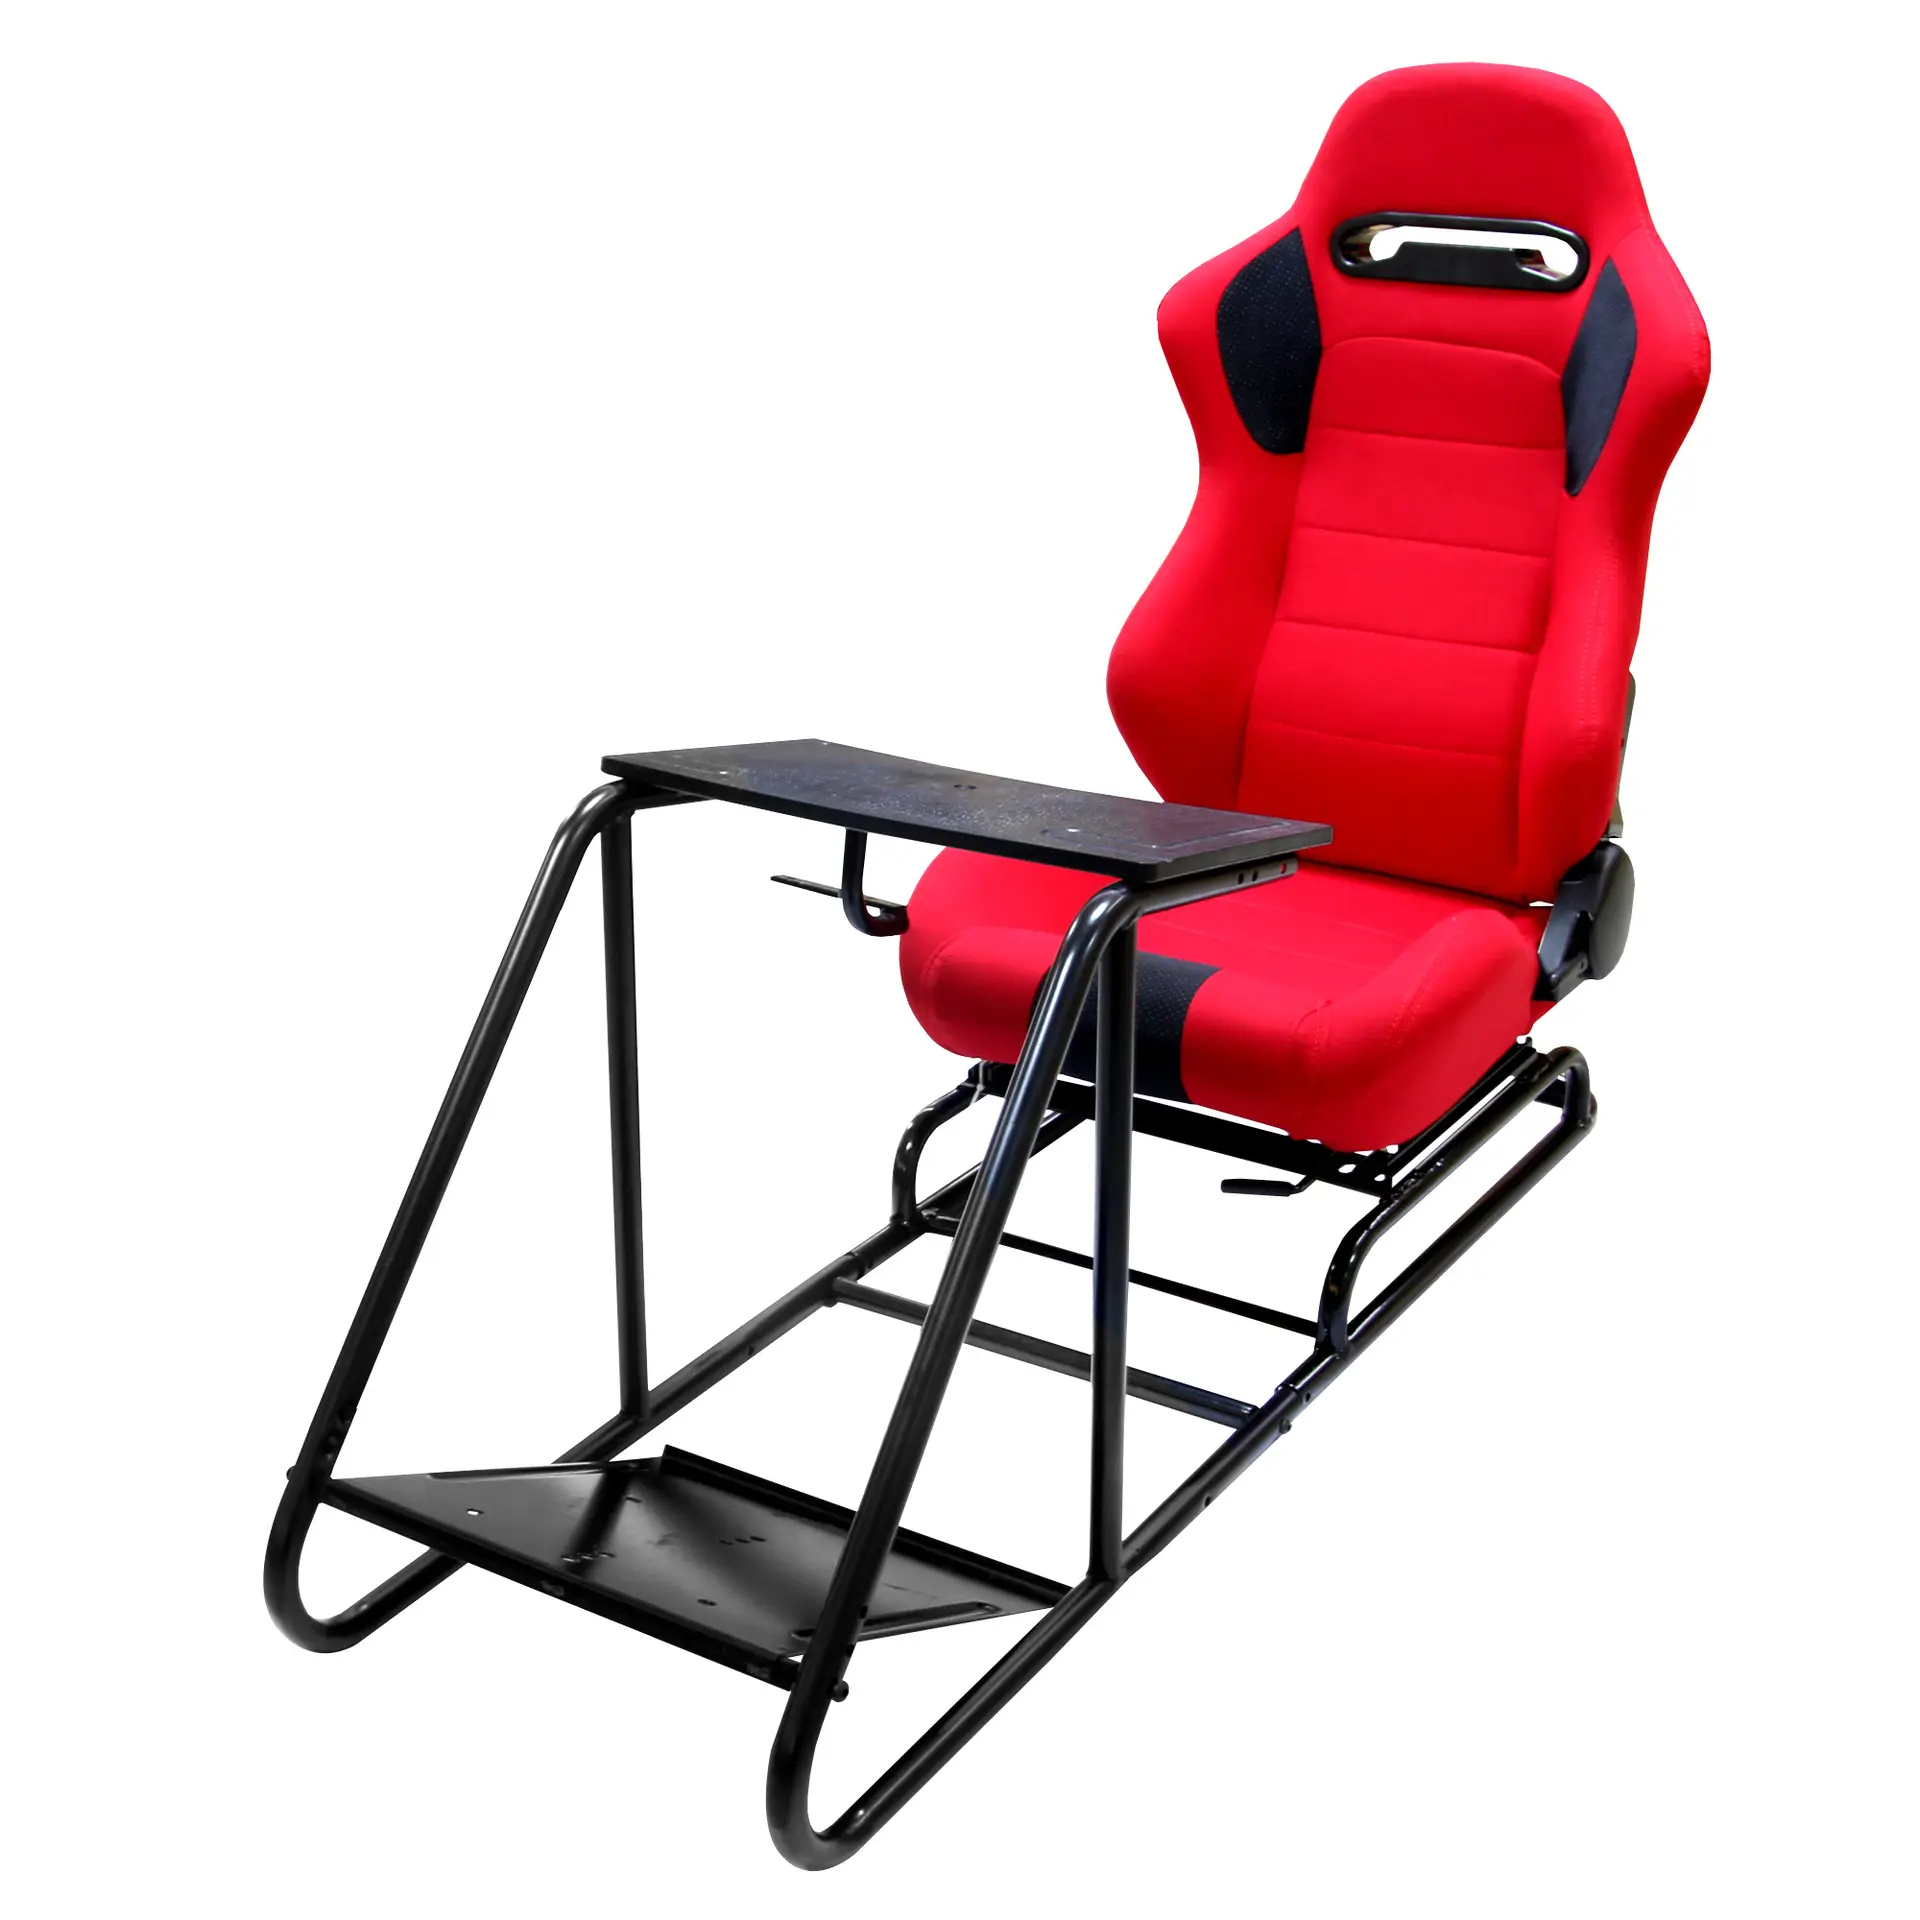 QSF Hot selling car modified racing seats, personalized fashion games competitive seats universal safety seats